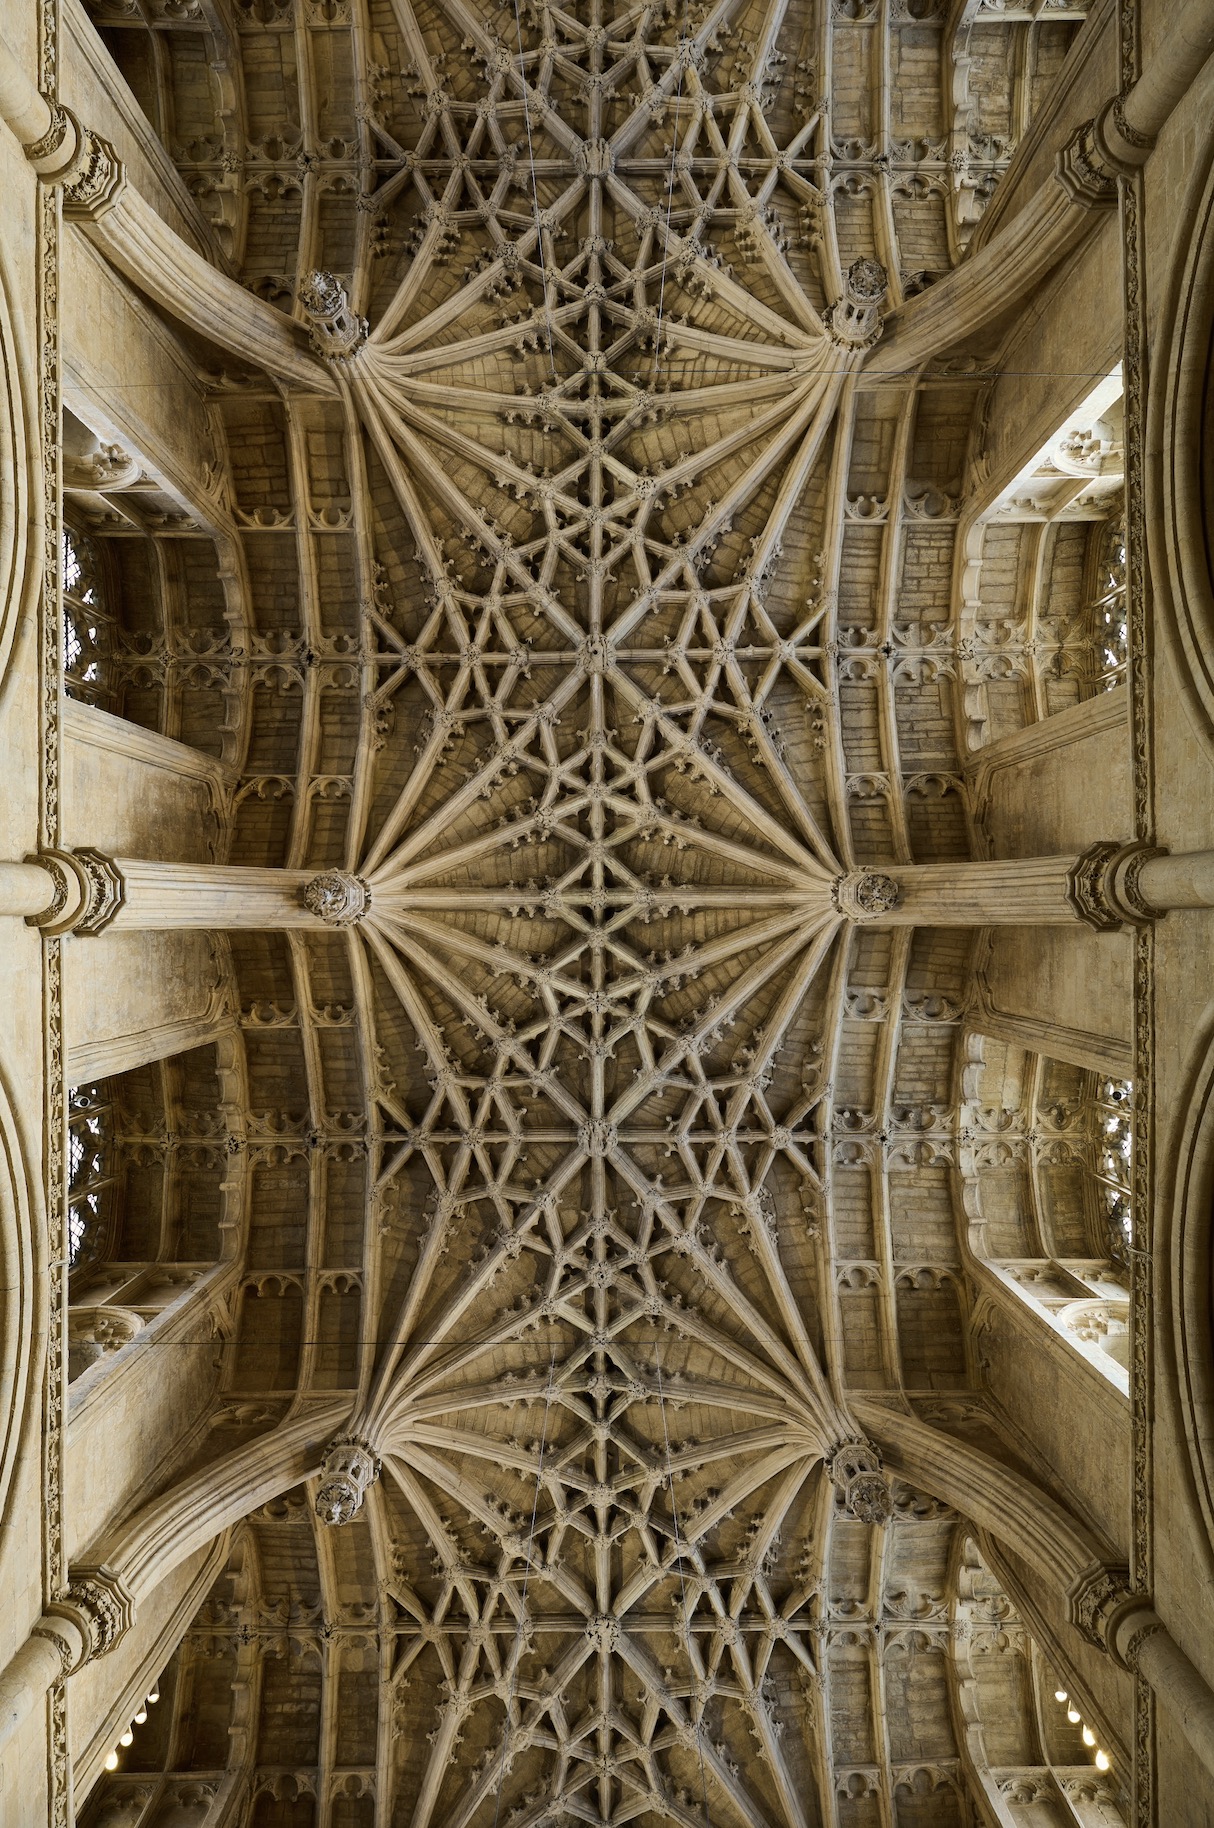 Christ Church Cathedral Ceiling - Always Look Up